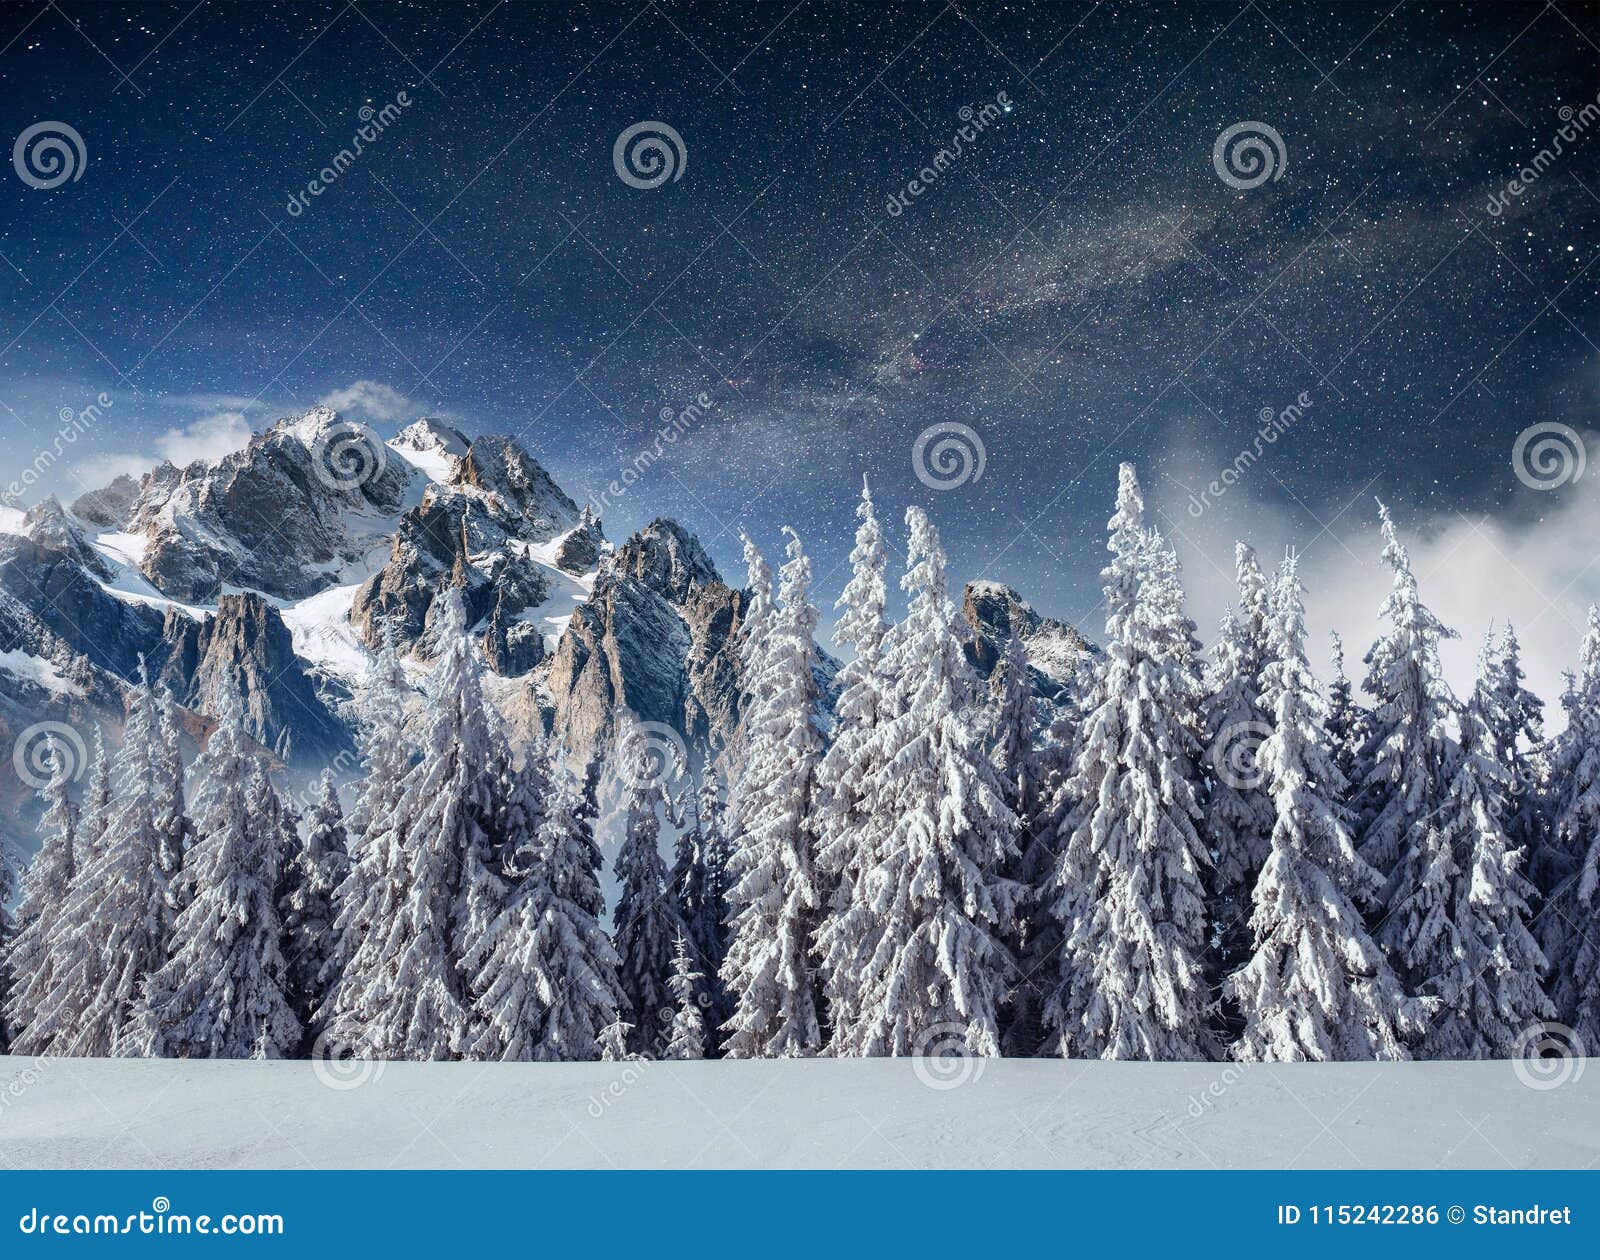 fantastic winter meteor shower and the snow-capped mountains. carpathians. ukraine, europe